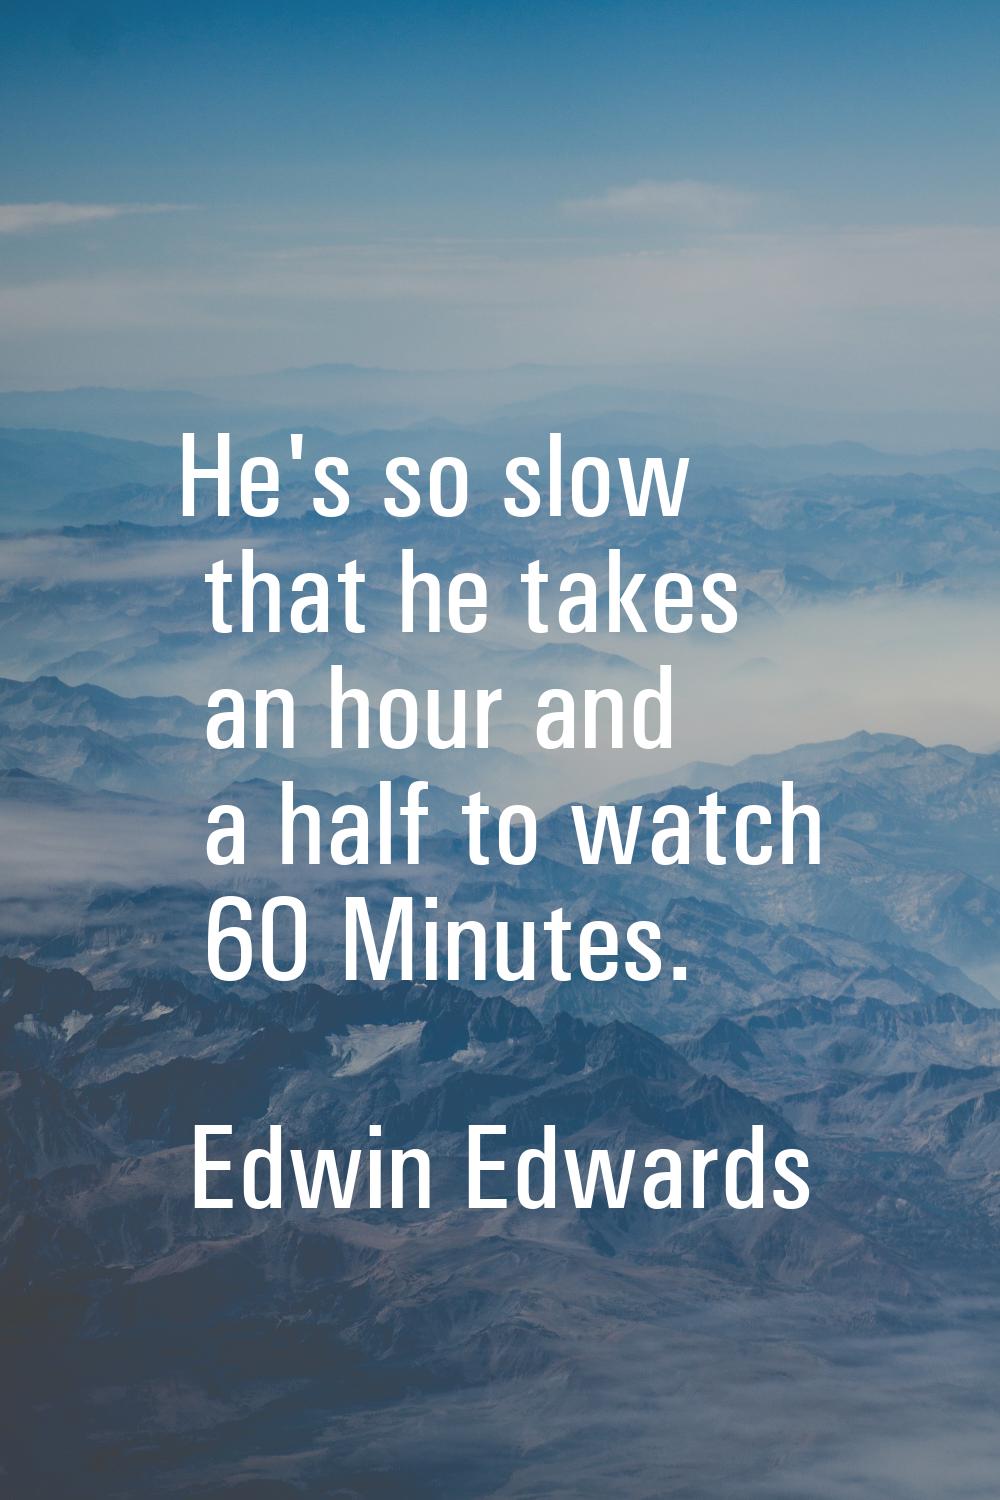 He's so slow that he takes an hour and a half to watch 60 Minutes.